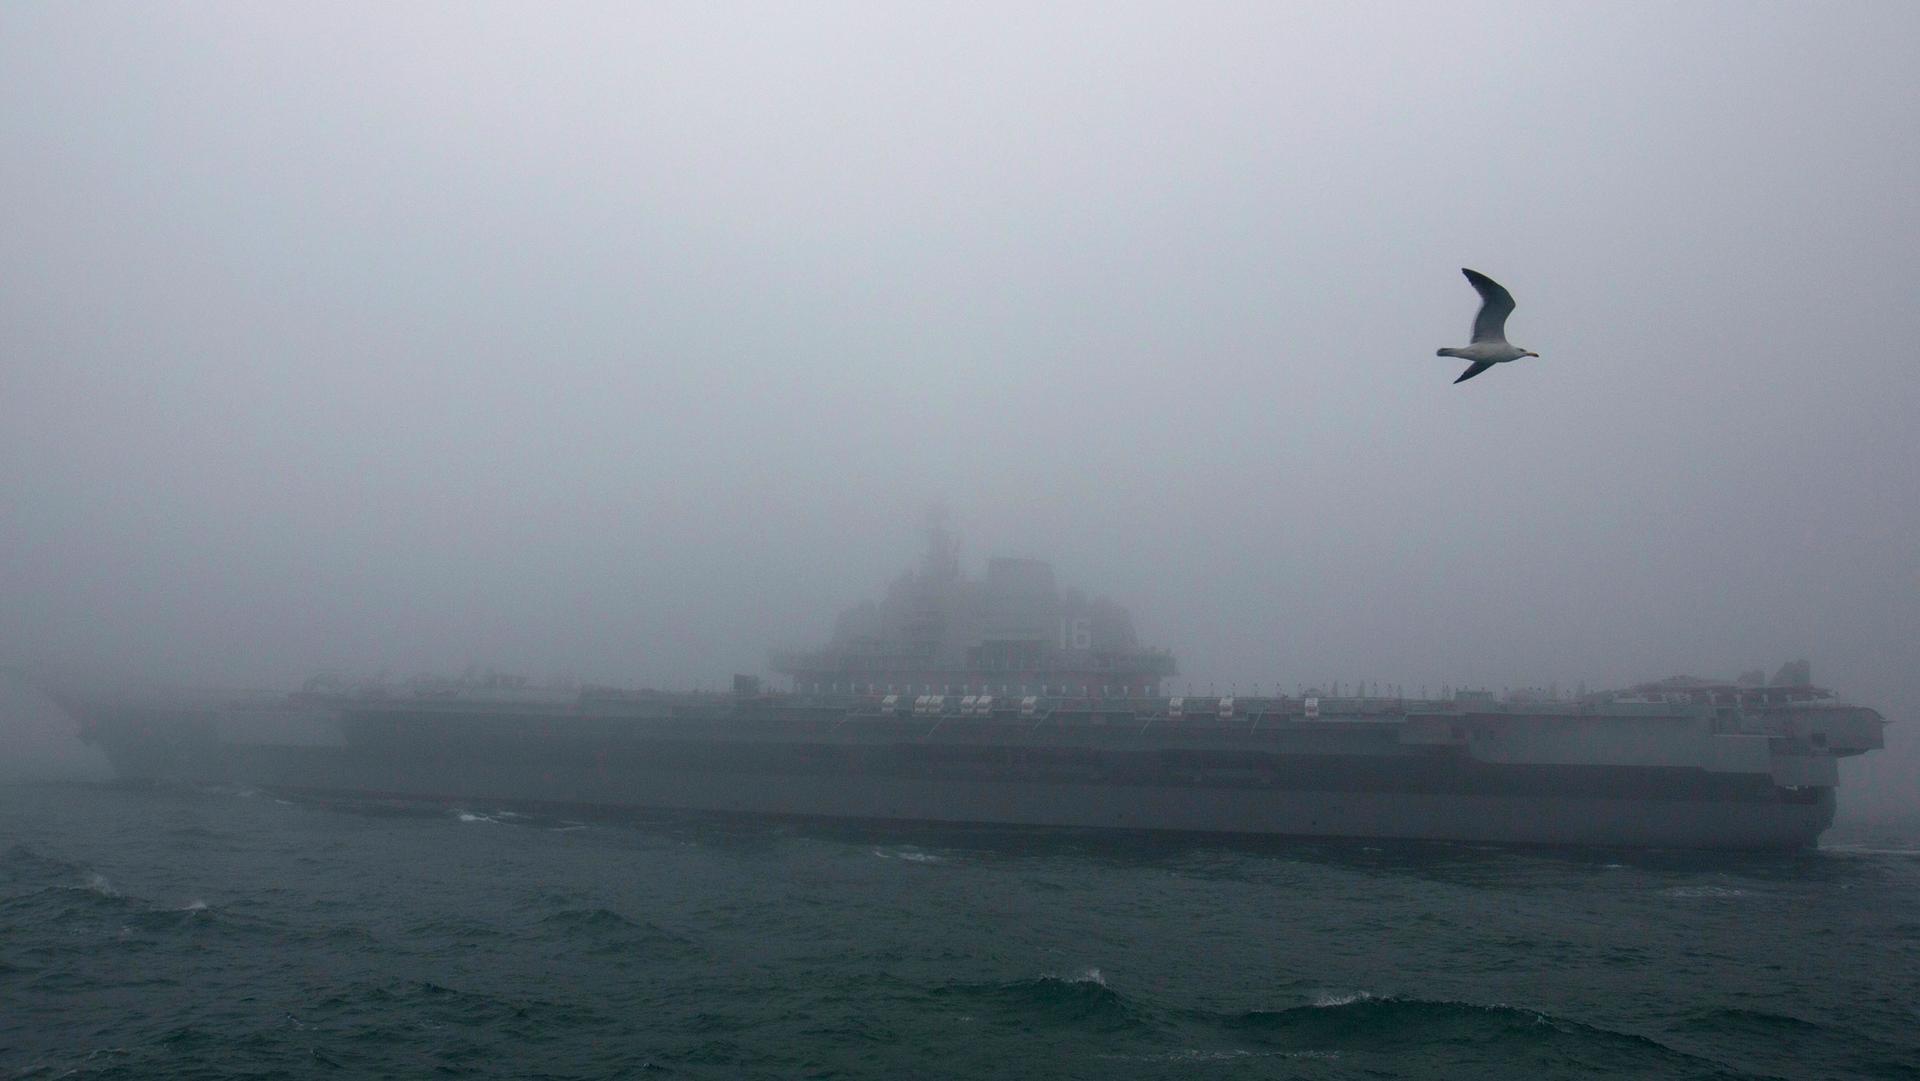 A large military vessel is shown in the distnace amid foggy weather conditions.